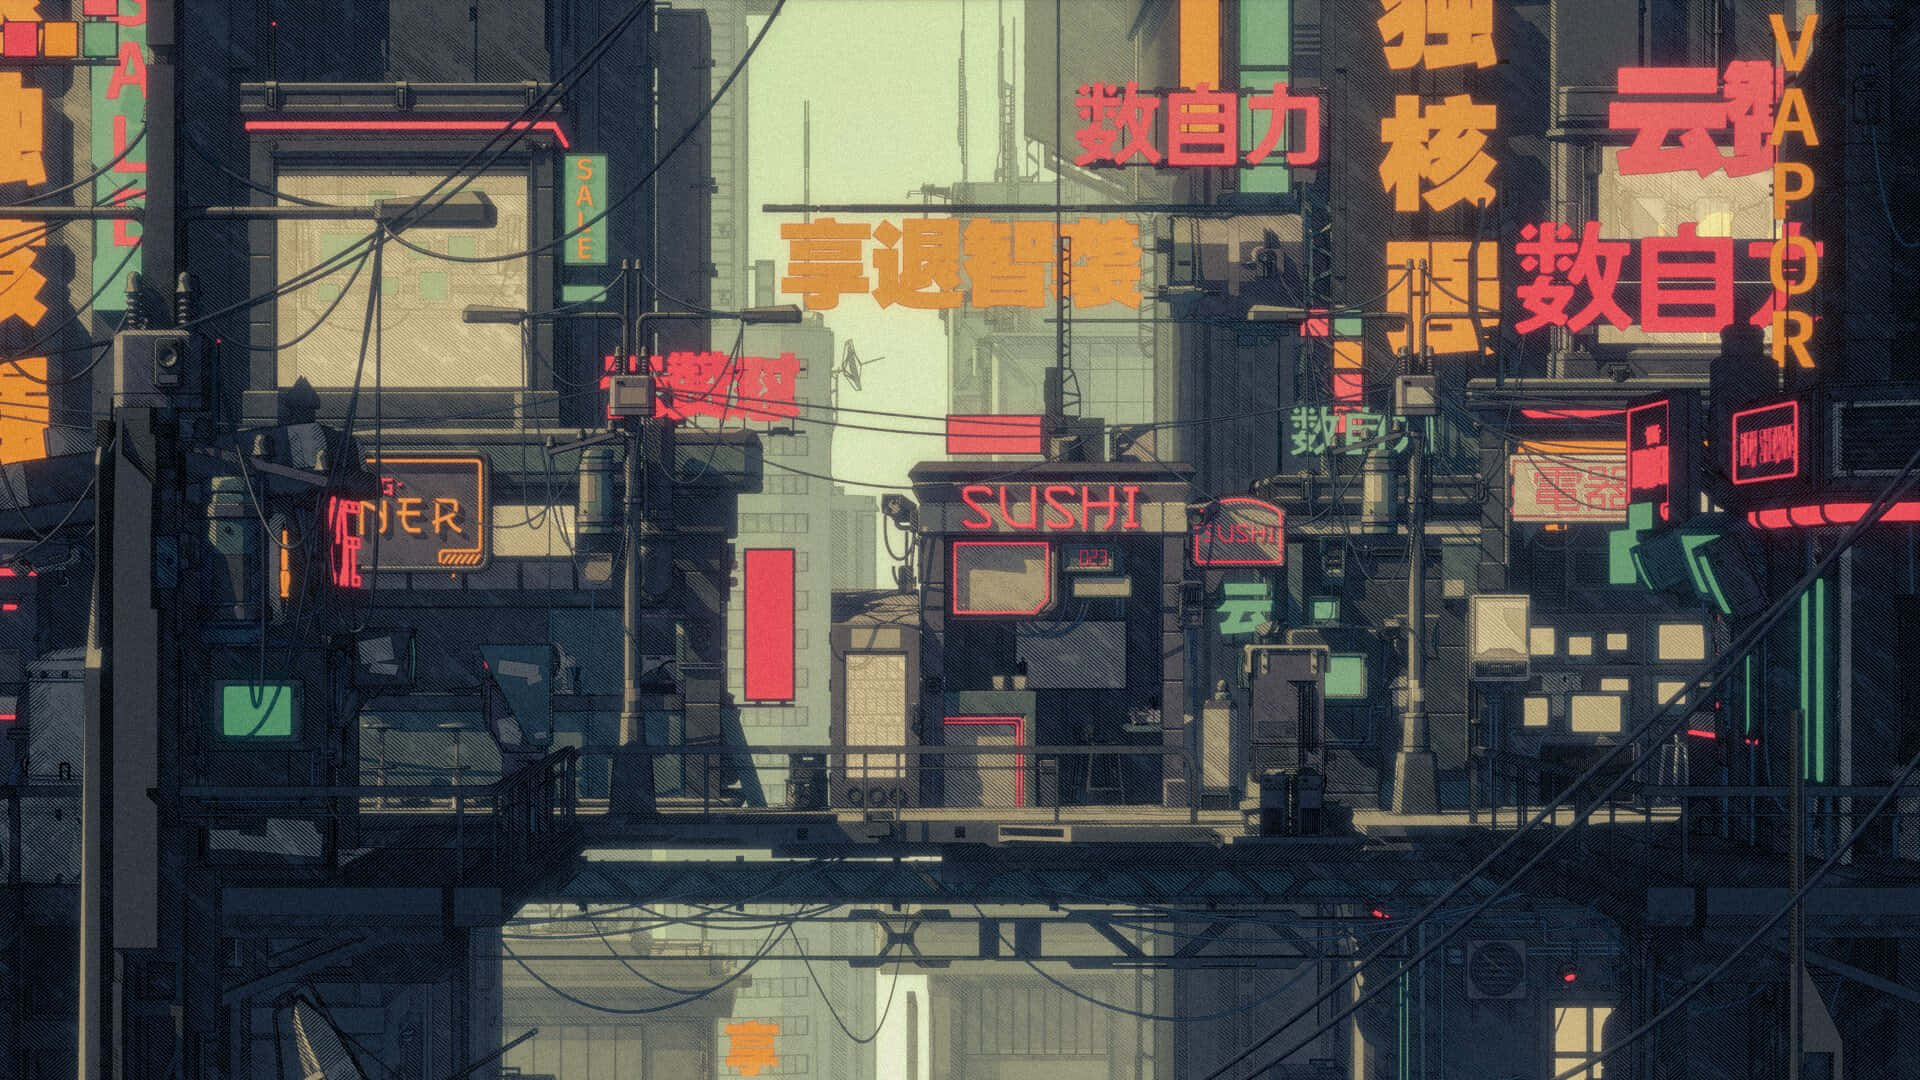 The massive architecture of Japan Cyberpunk awes those who experience it. Wallpaper